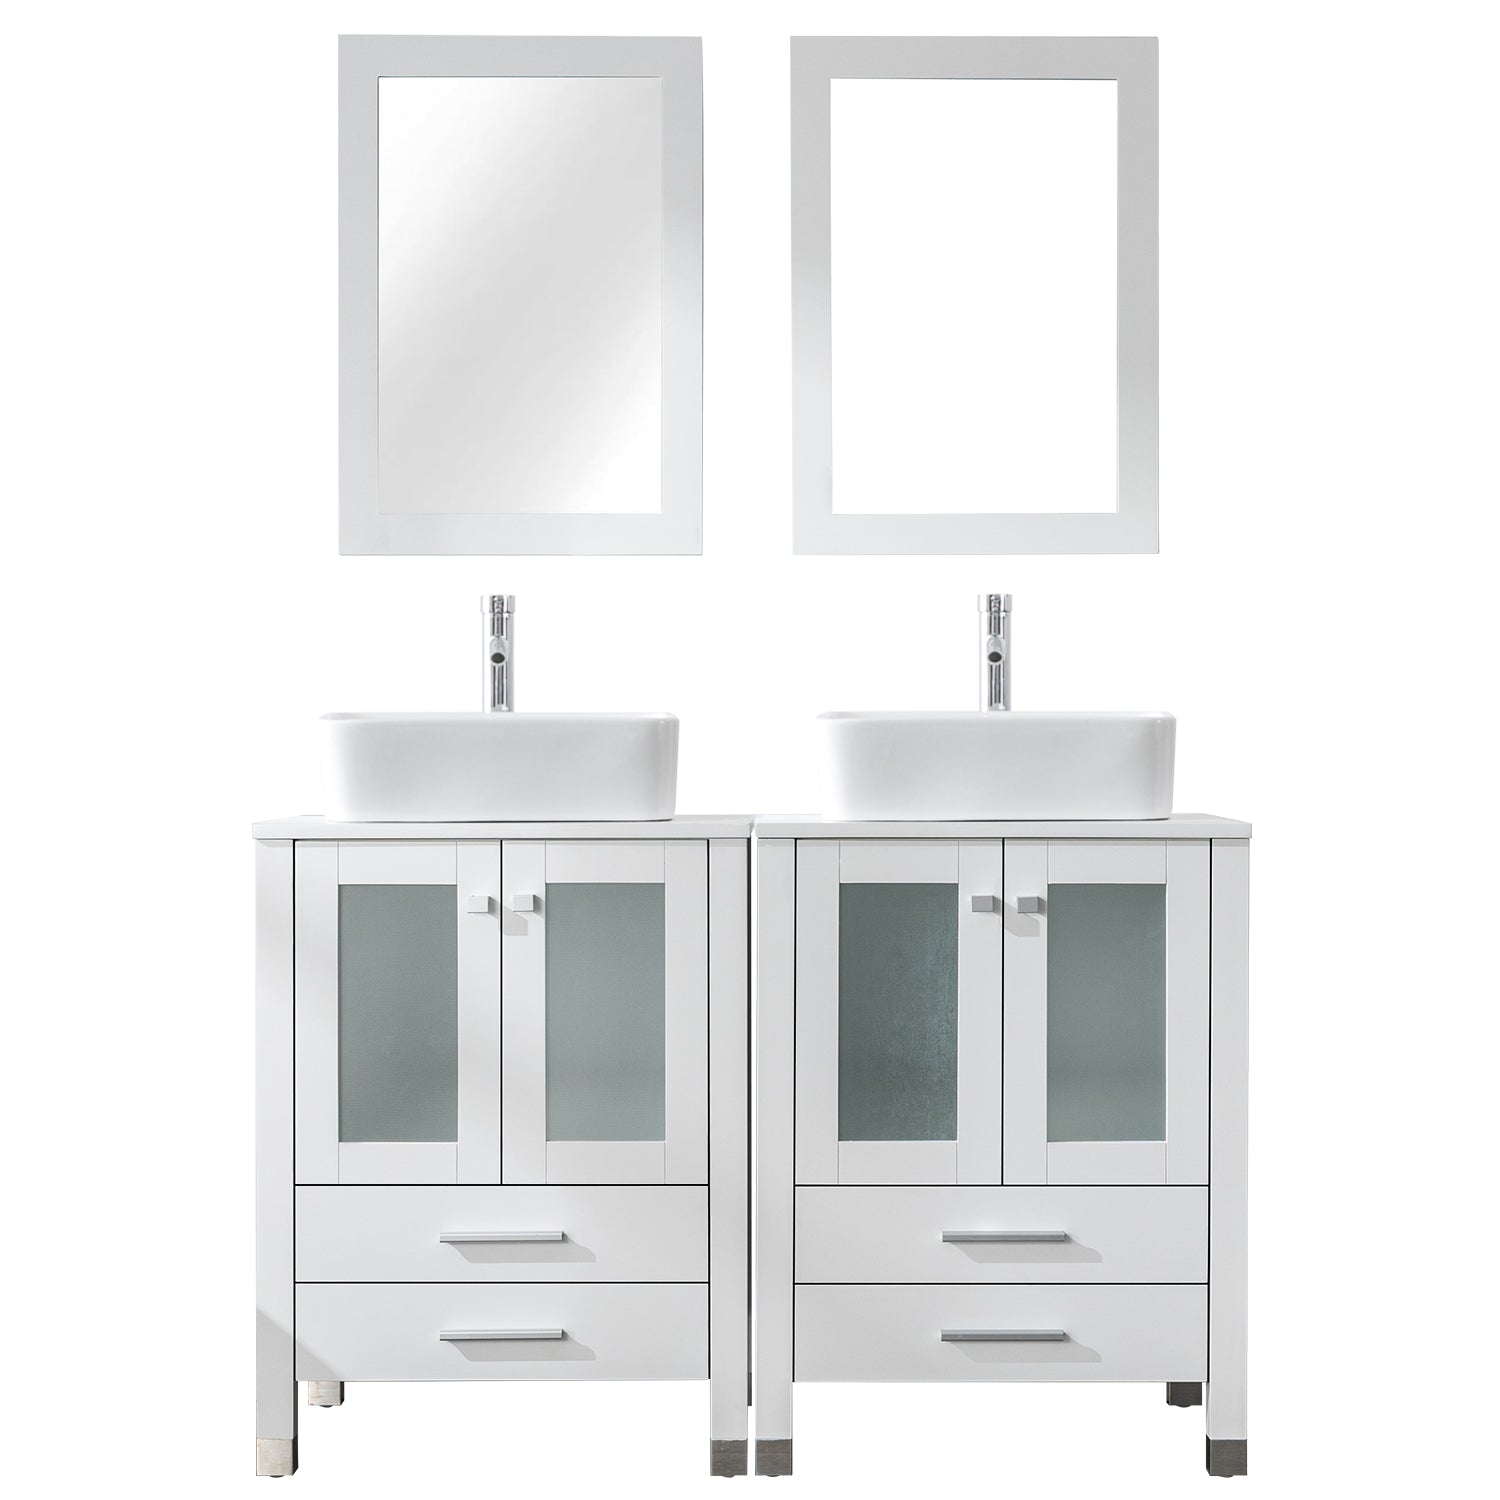 Eclife 48" Double Bathroom Vanity Sink Combos with Solid Wood Construction and Painted Frame - White